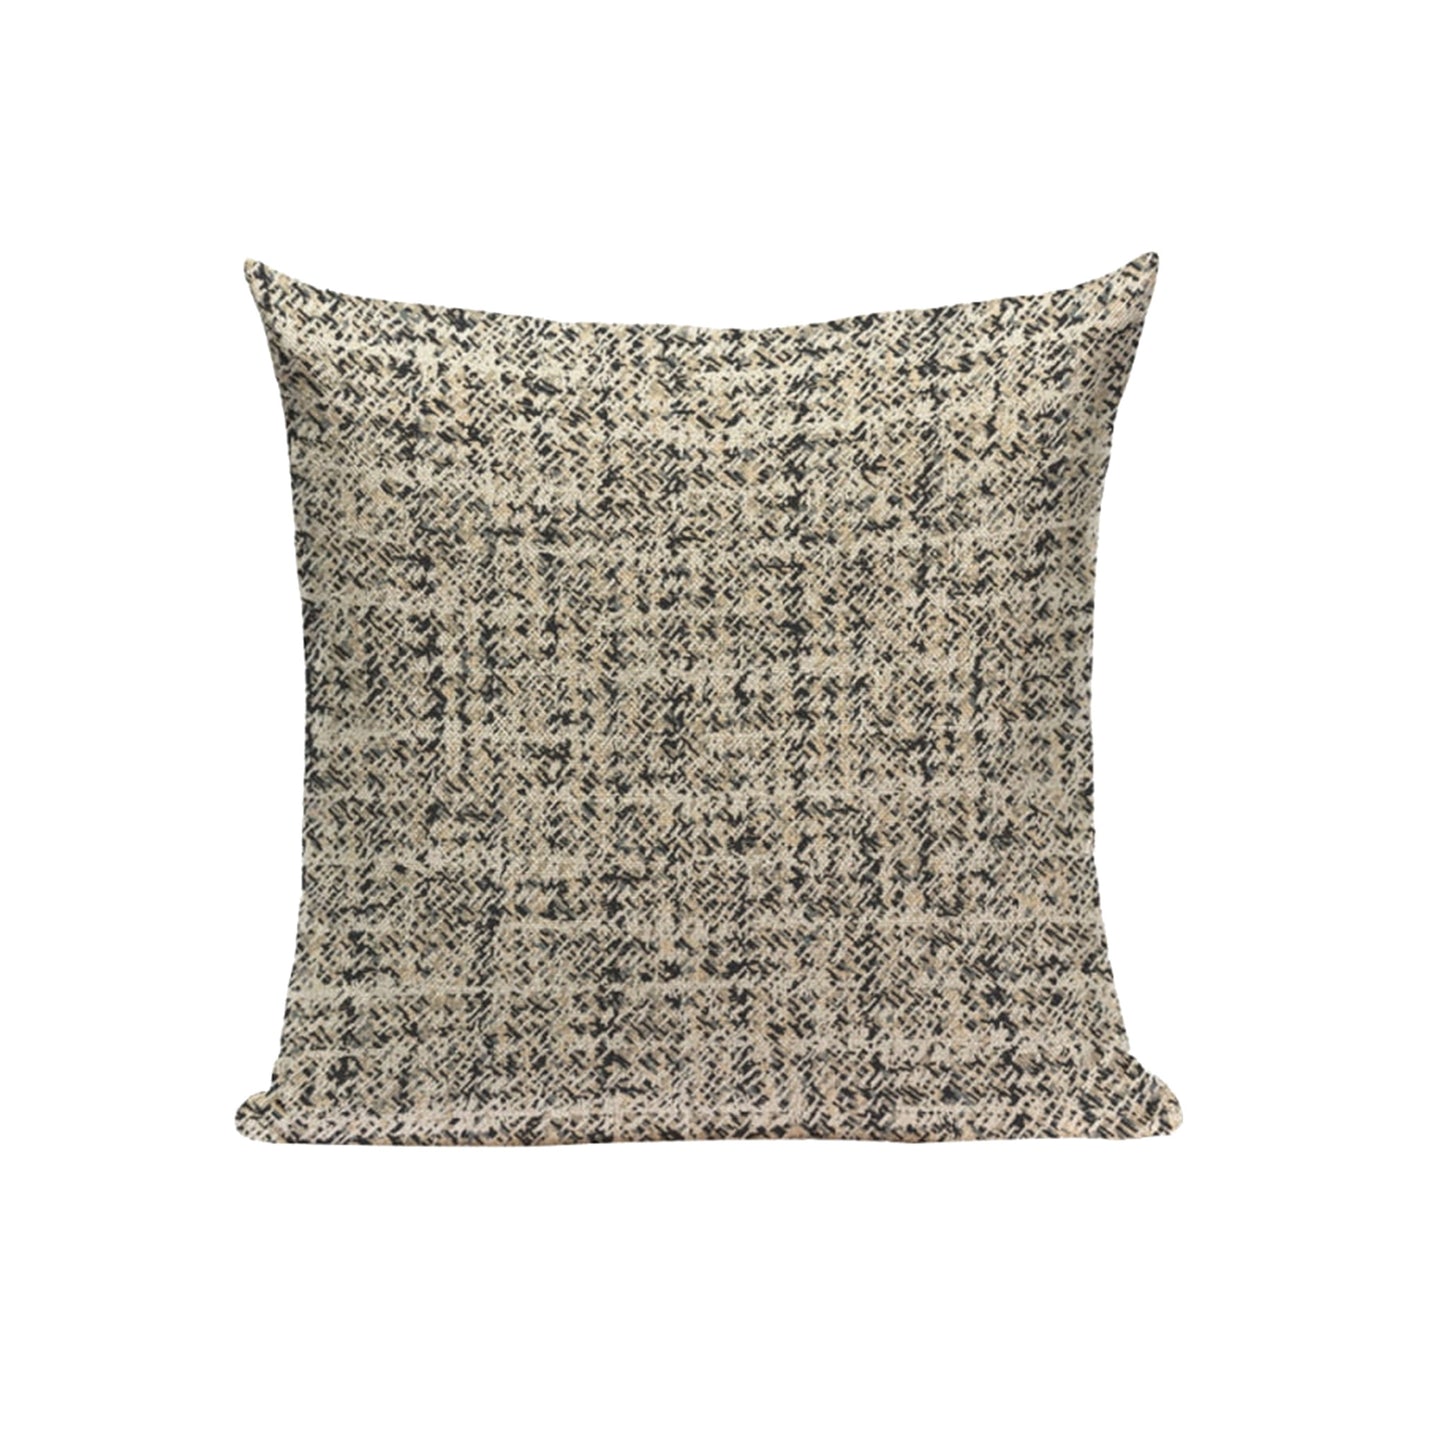 Sand Black Washed Houndstooth Cushion Cover